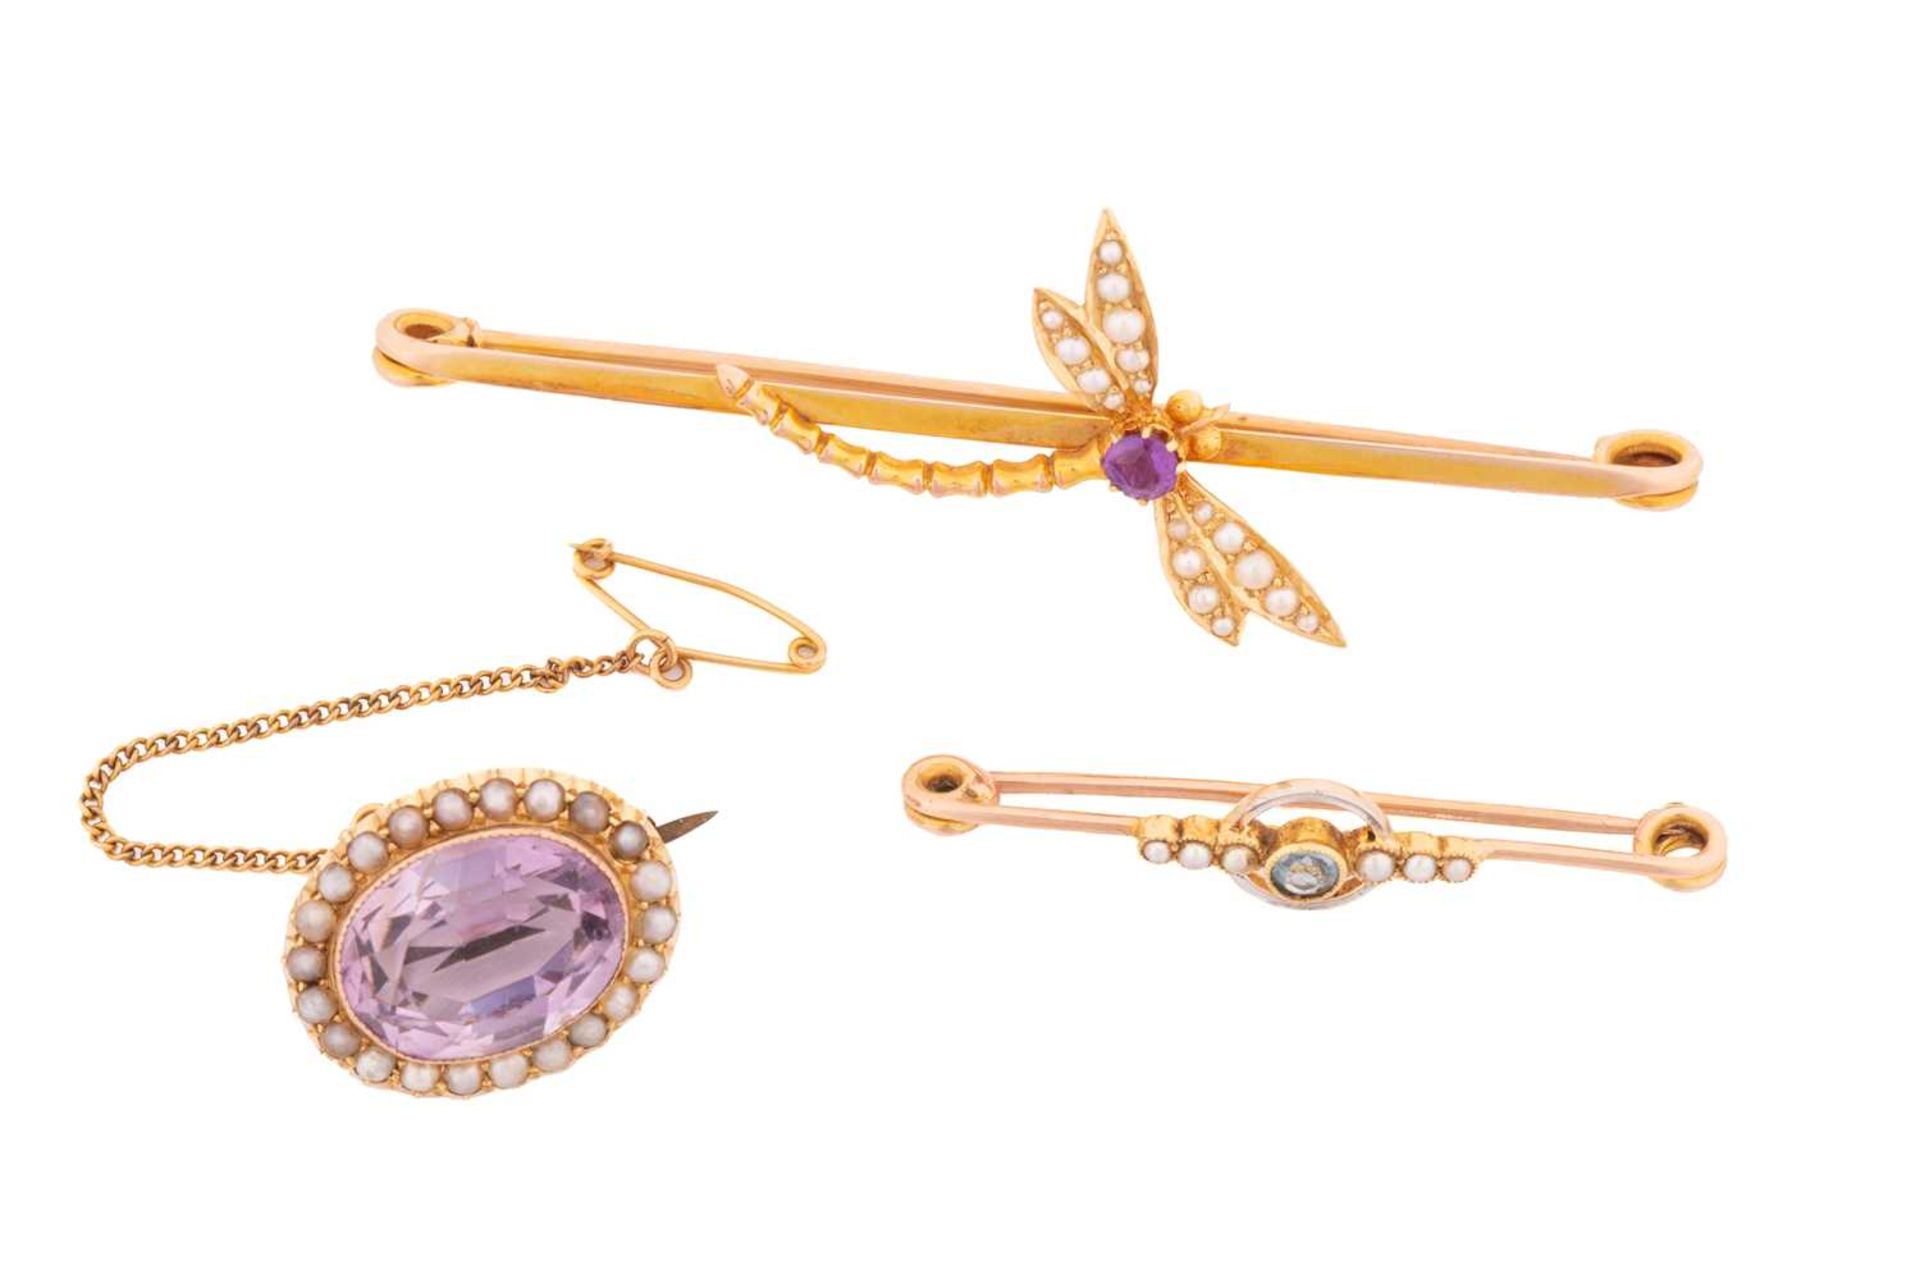 Three gem-set brooches with seed pearls; the first contains an oval-cut amethyst with pale purple